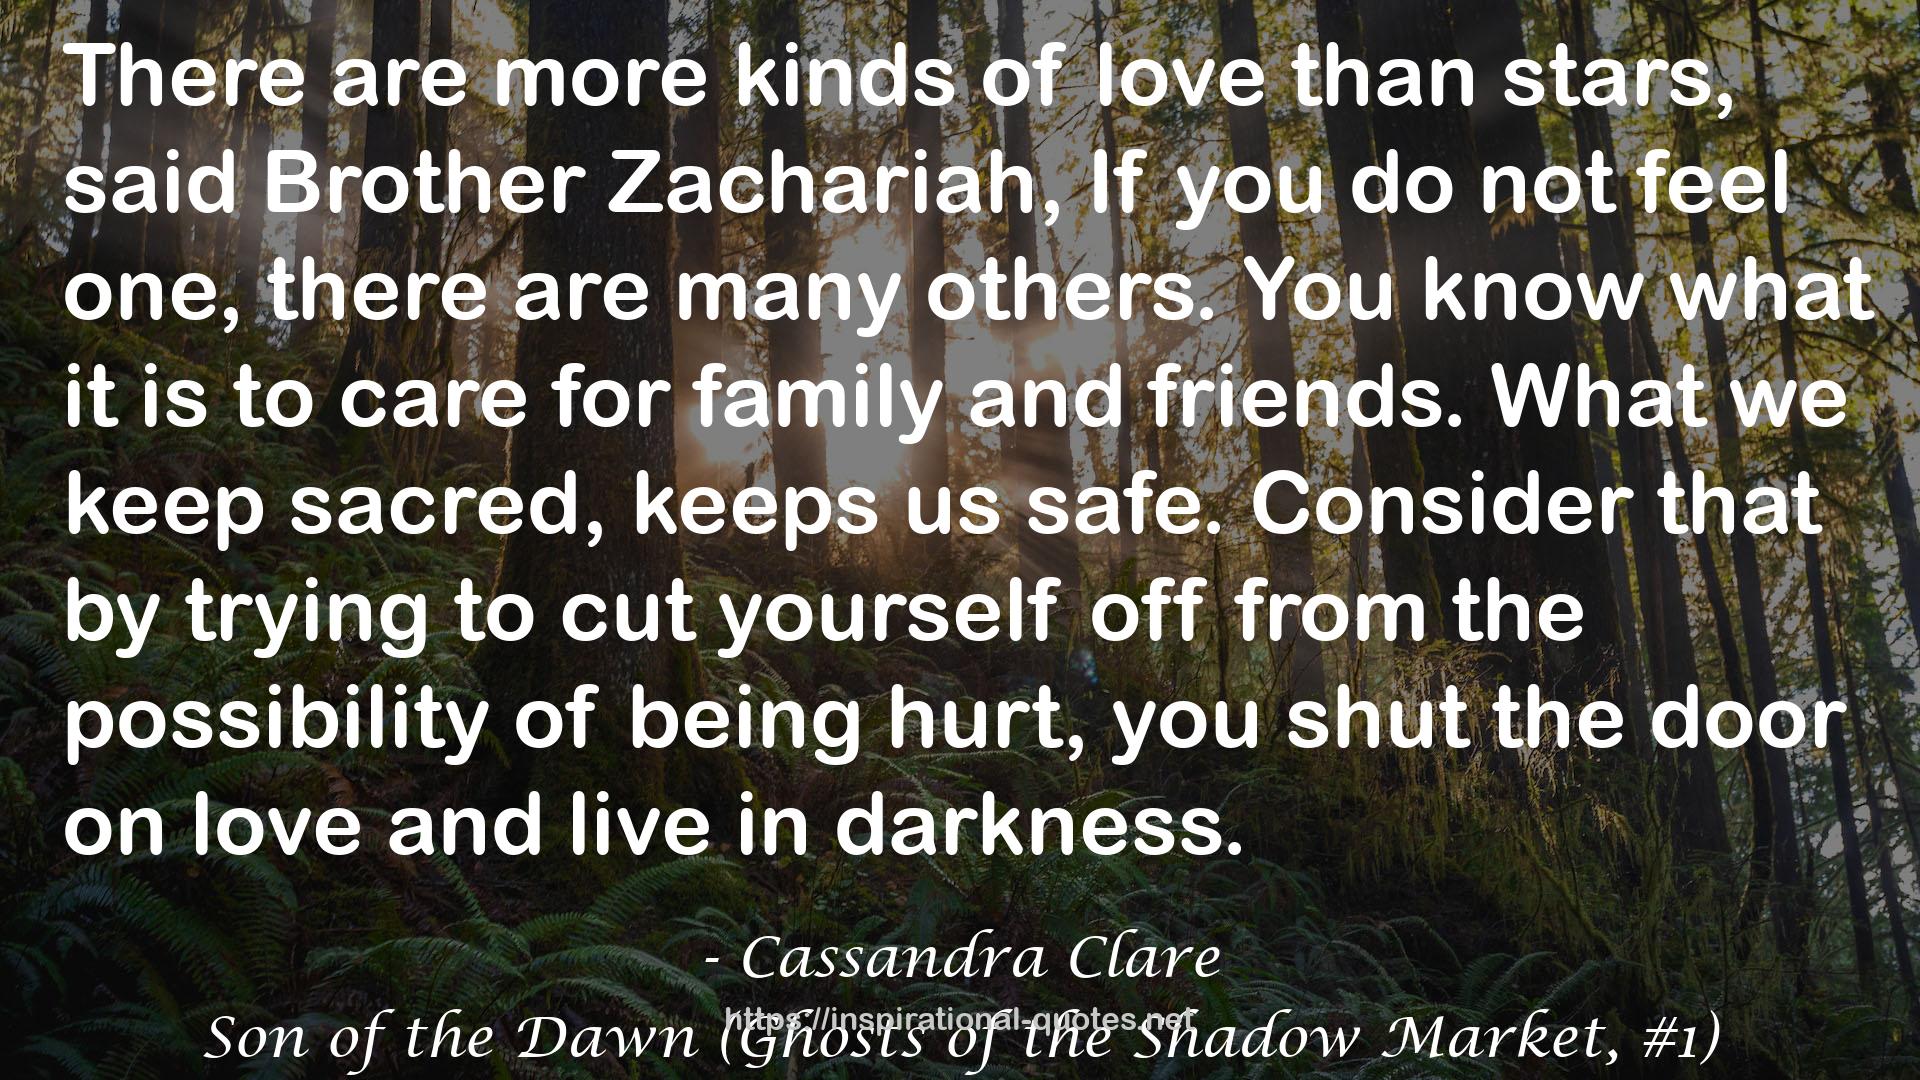 Son of the Dawn (Ghosts of the Shadow Market, #1) QUOTES